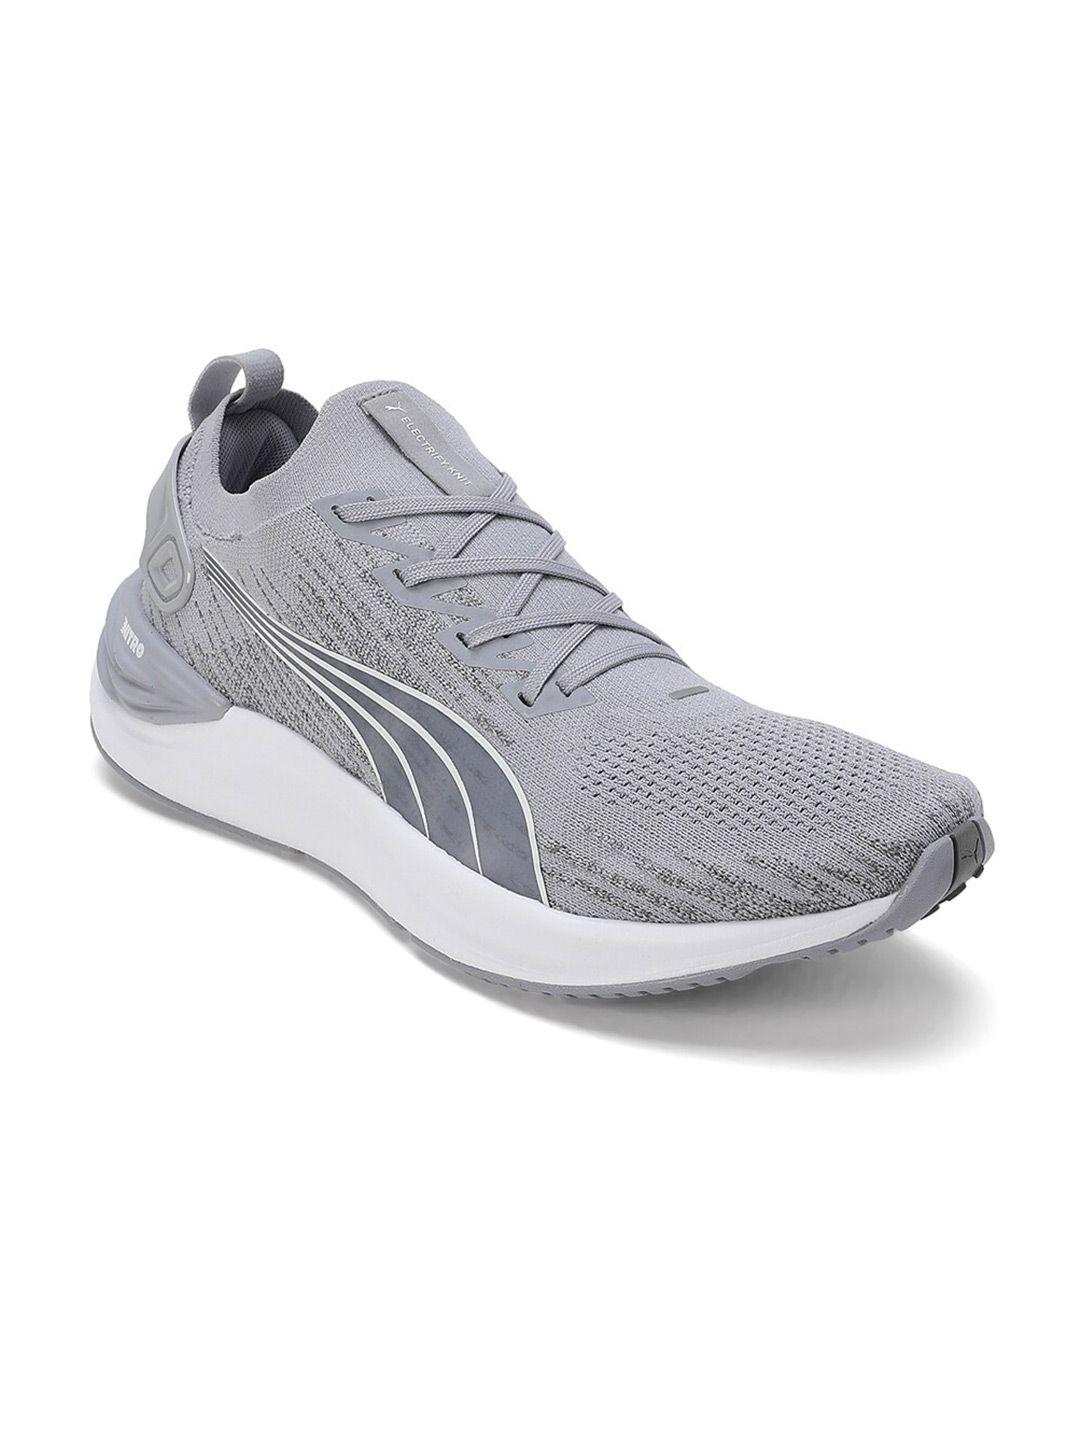 puma electrify nitro 3 men patterned lace-up running sports shoes